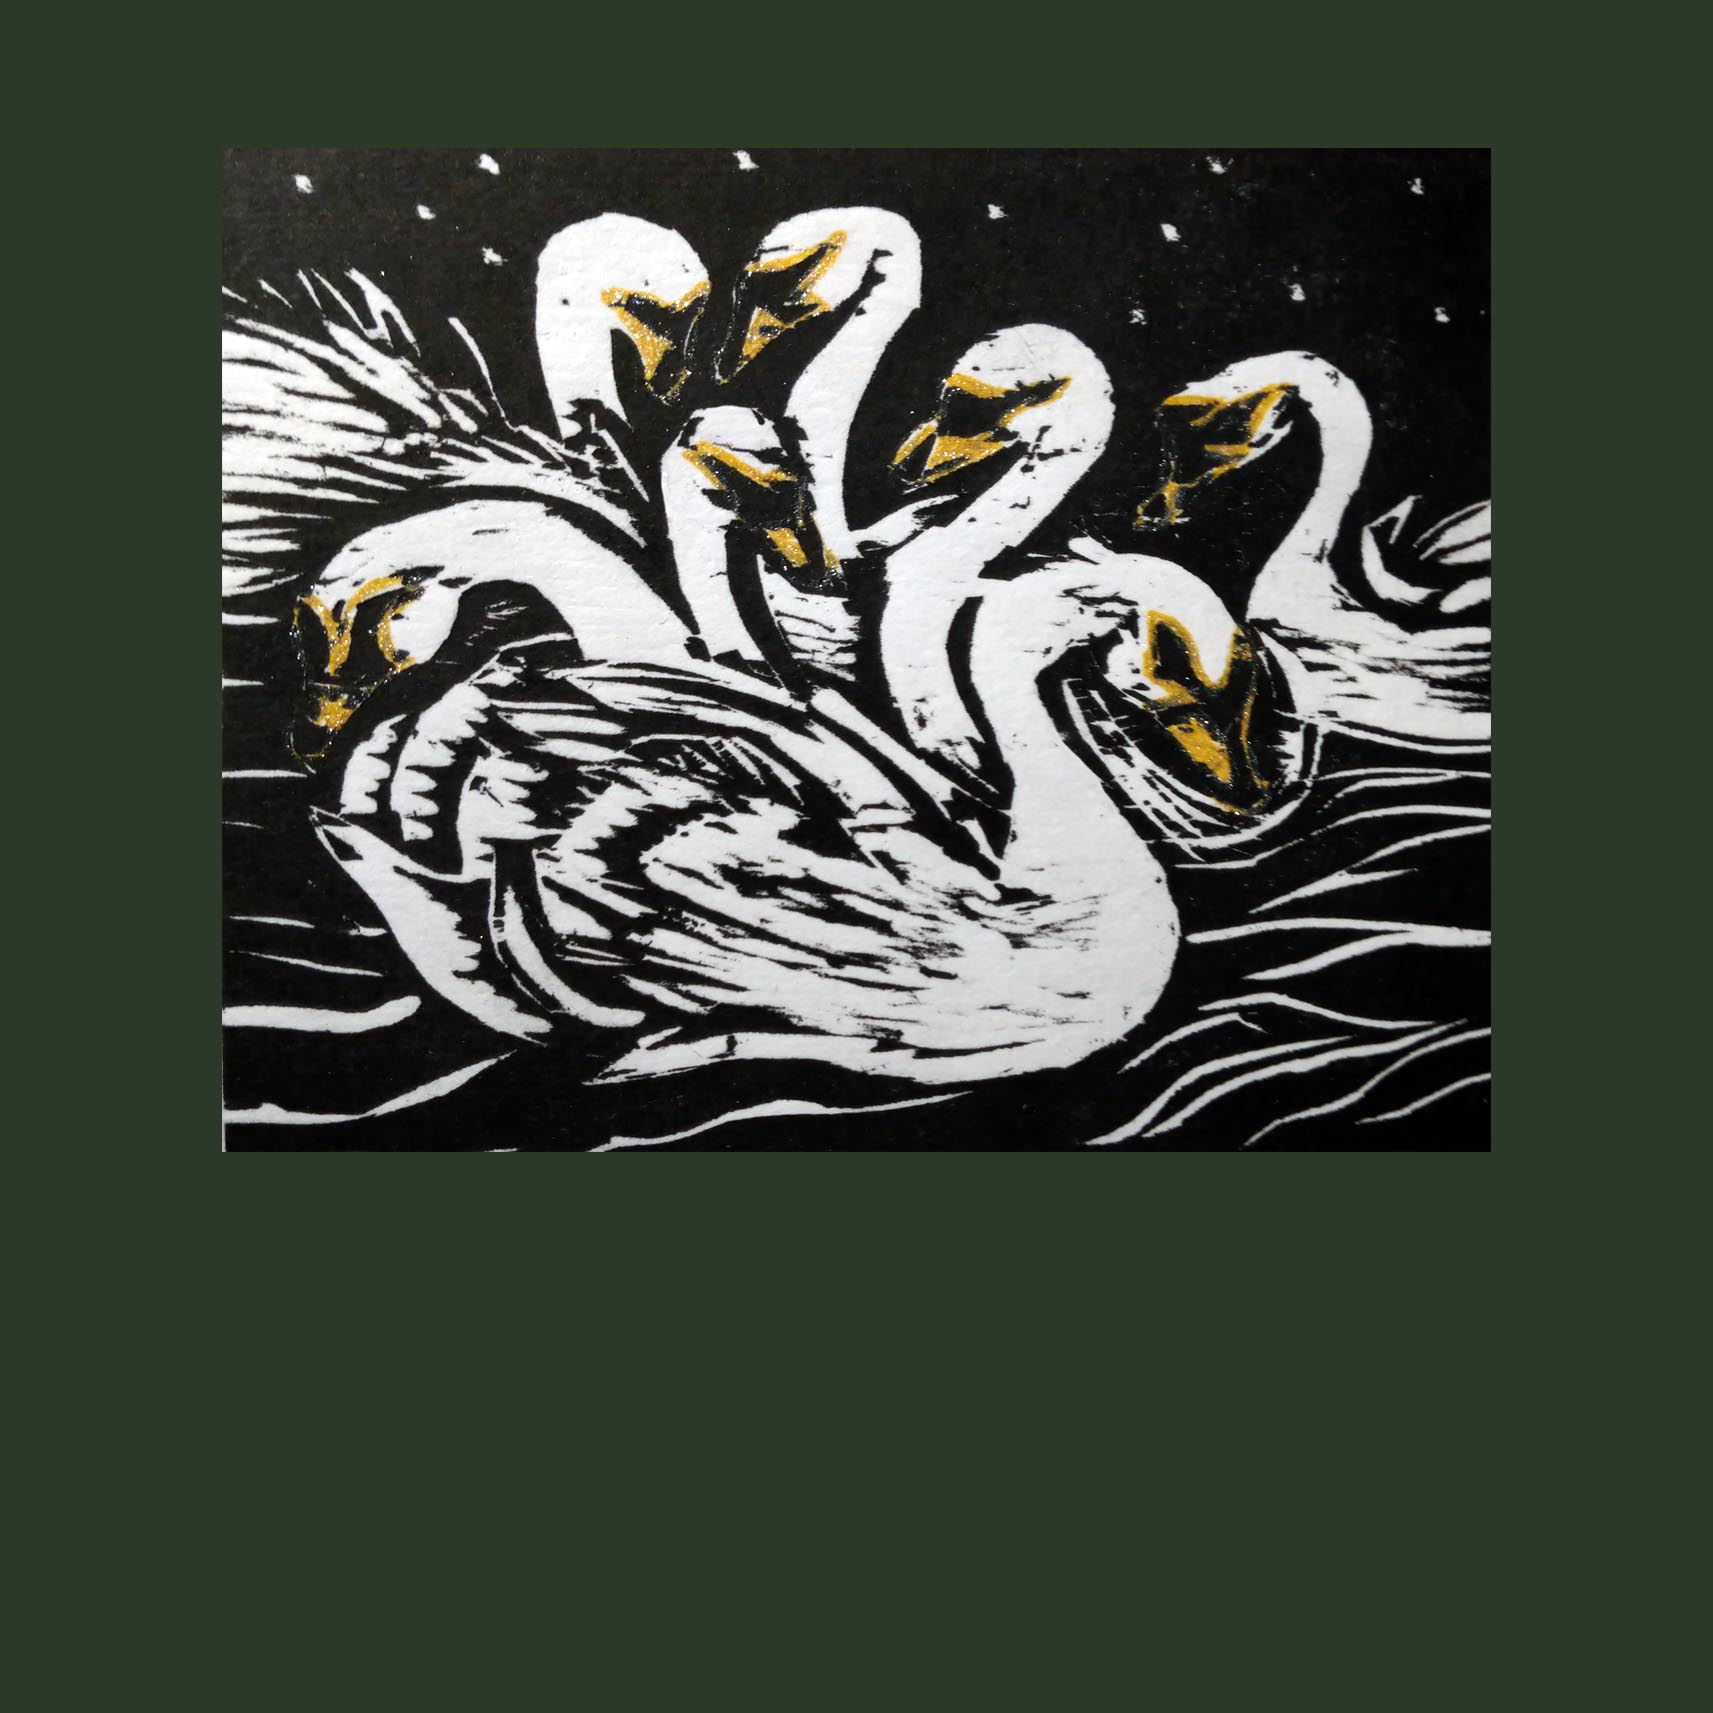 7 swans - woodcut print, black and white image on green background, swans have golden beaks